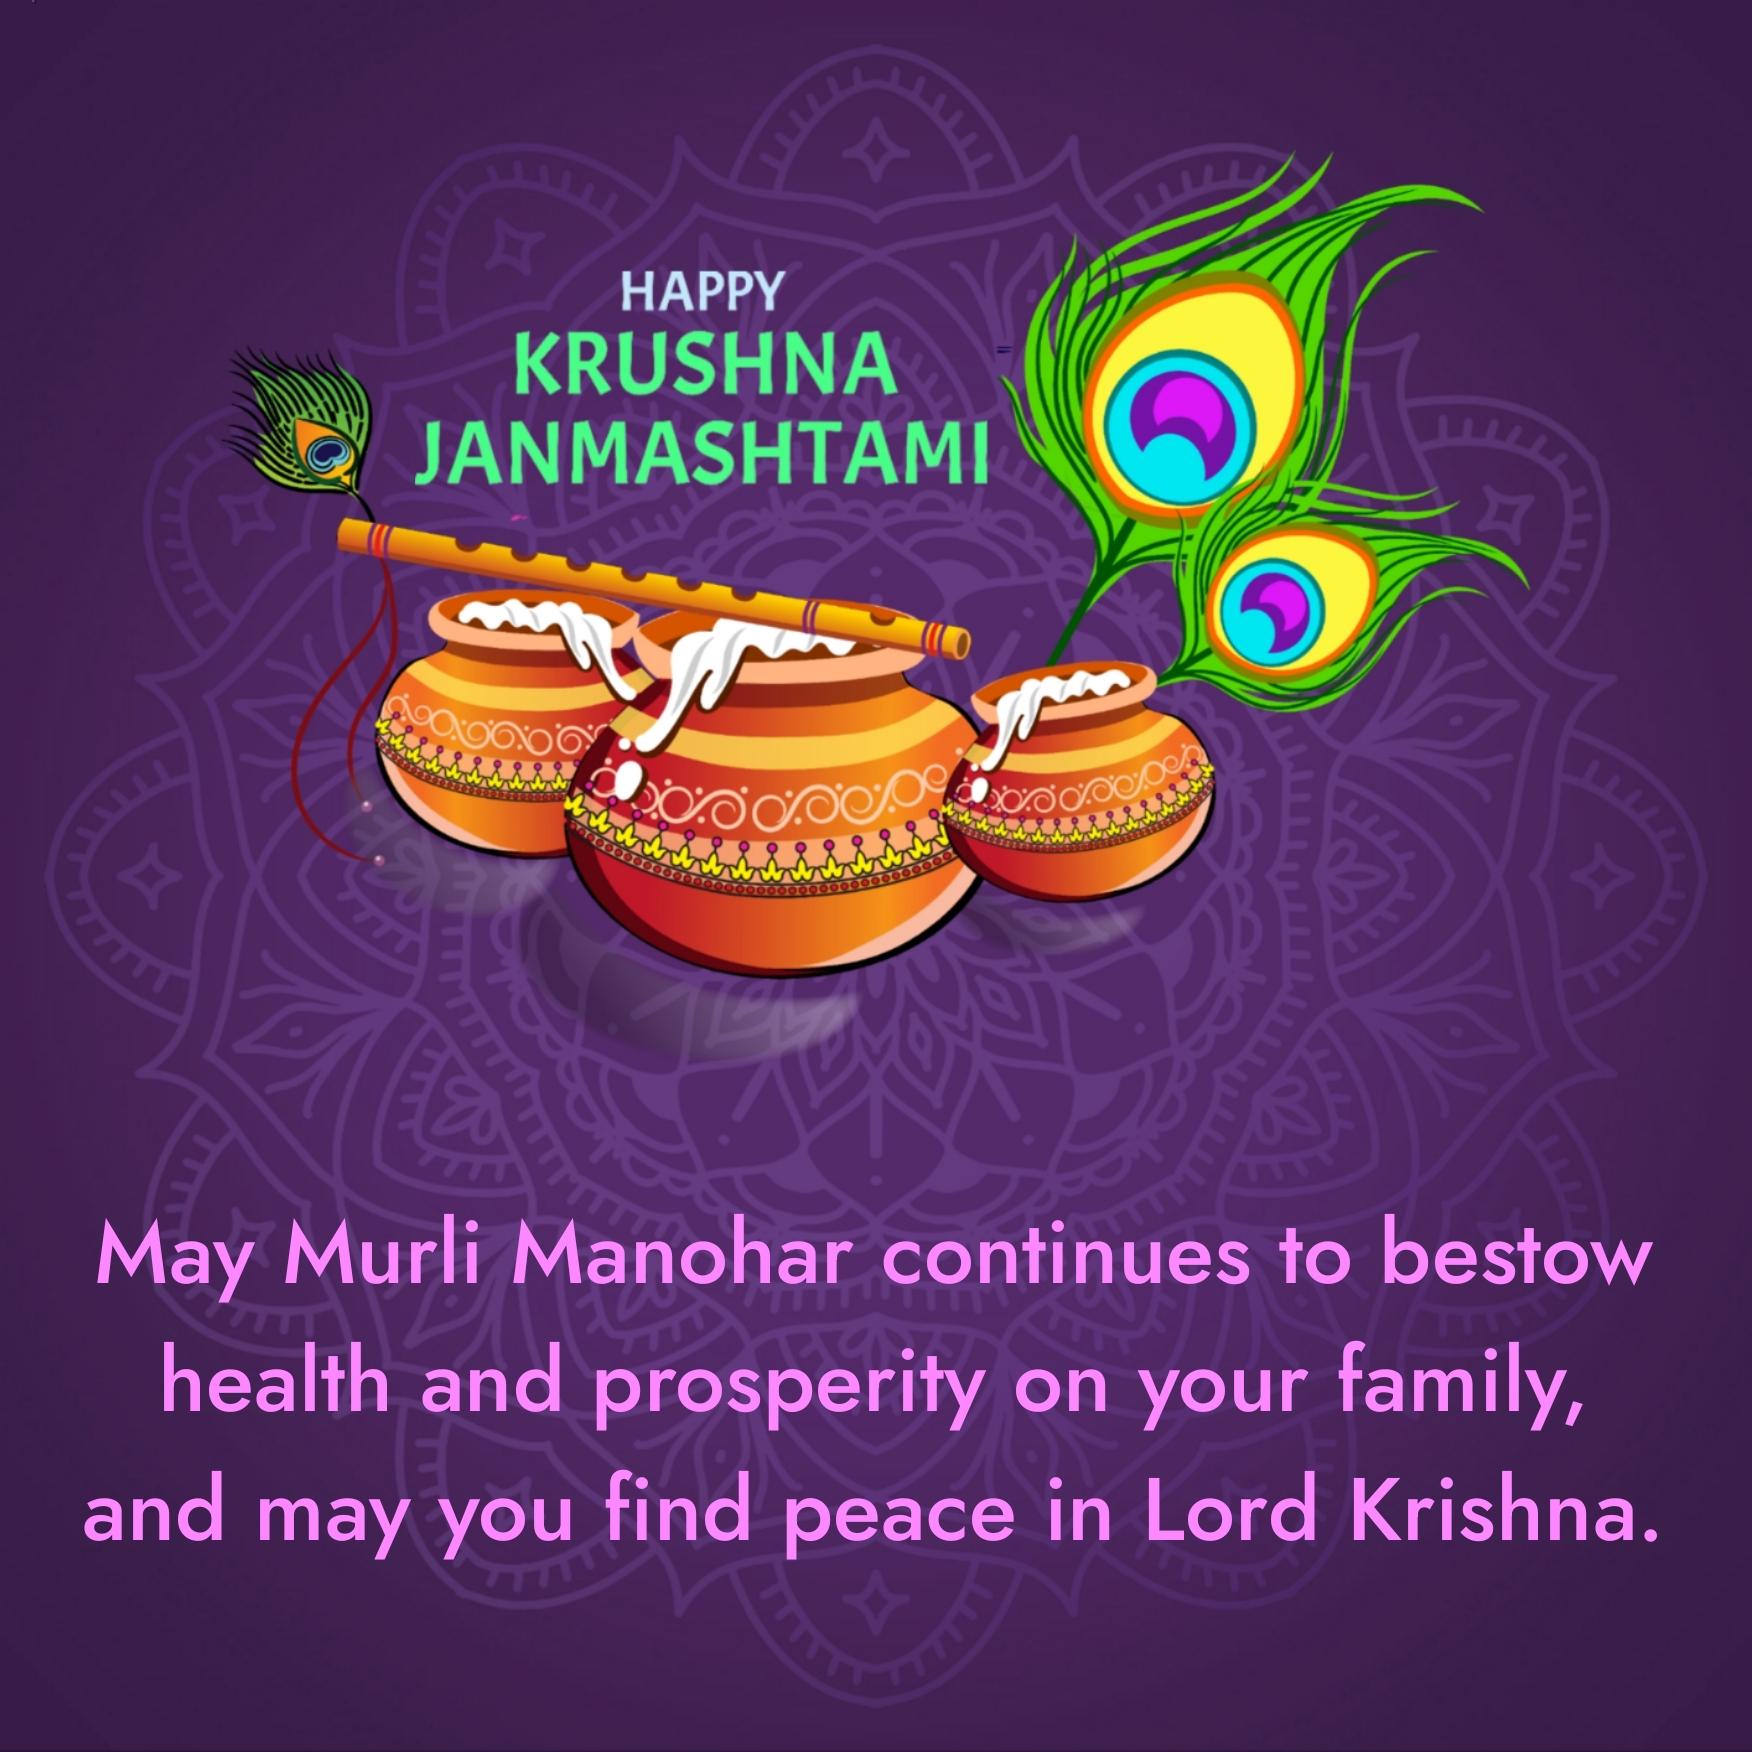 May Murli Manohar continues to bestow health and prosperity